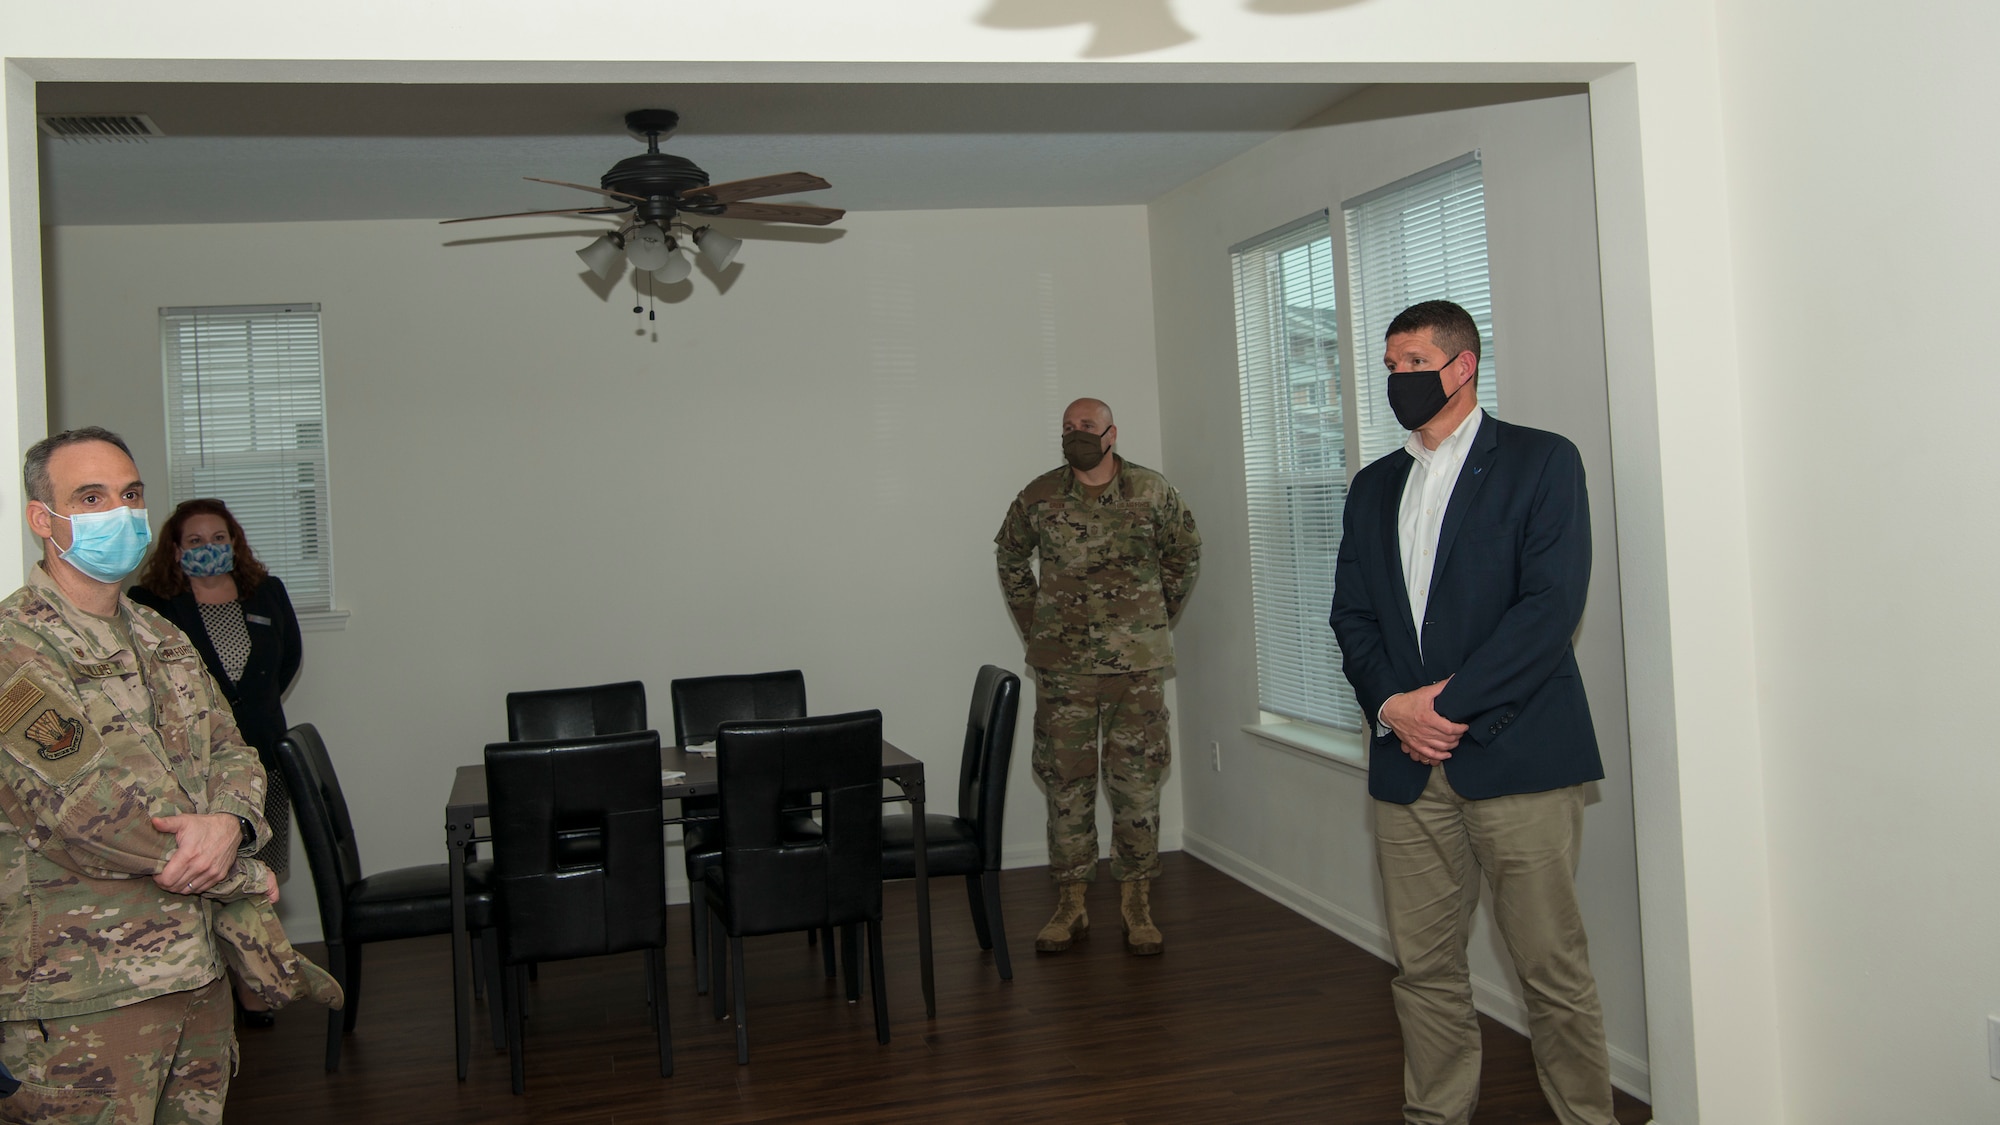 Hon. John Henderson, the Assistant Secretary of the Air Force for Environment, Installations and Energy, meets with 6th Air Refueling Wing leadership at a house on MacDill Air Force Base, Fla., June 10, 2020.